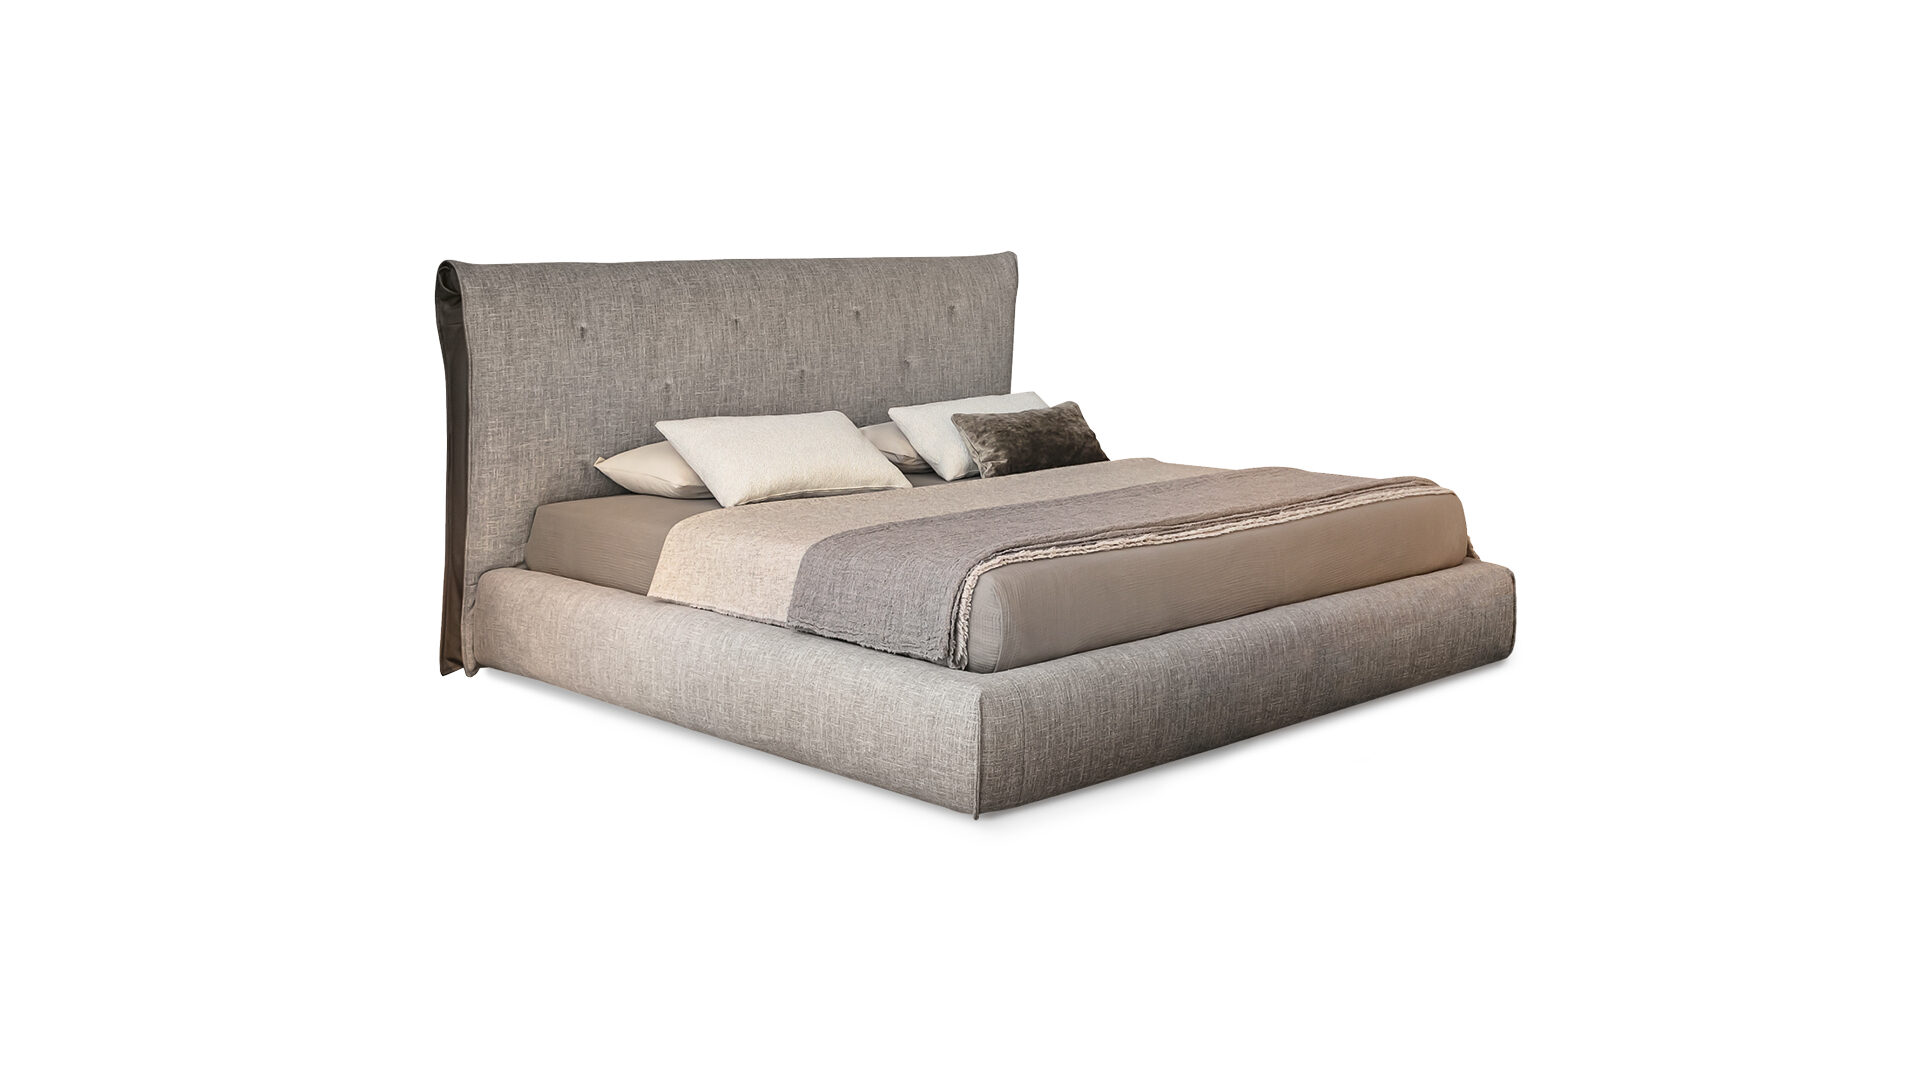 saddle-bed-png